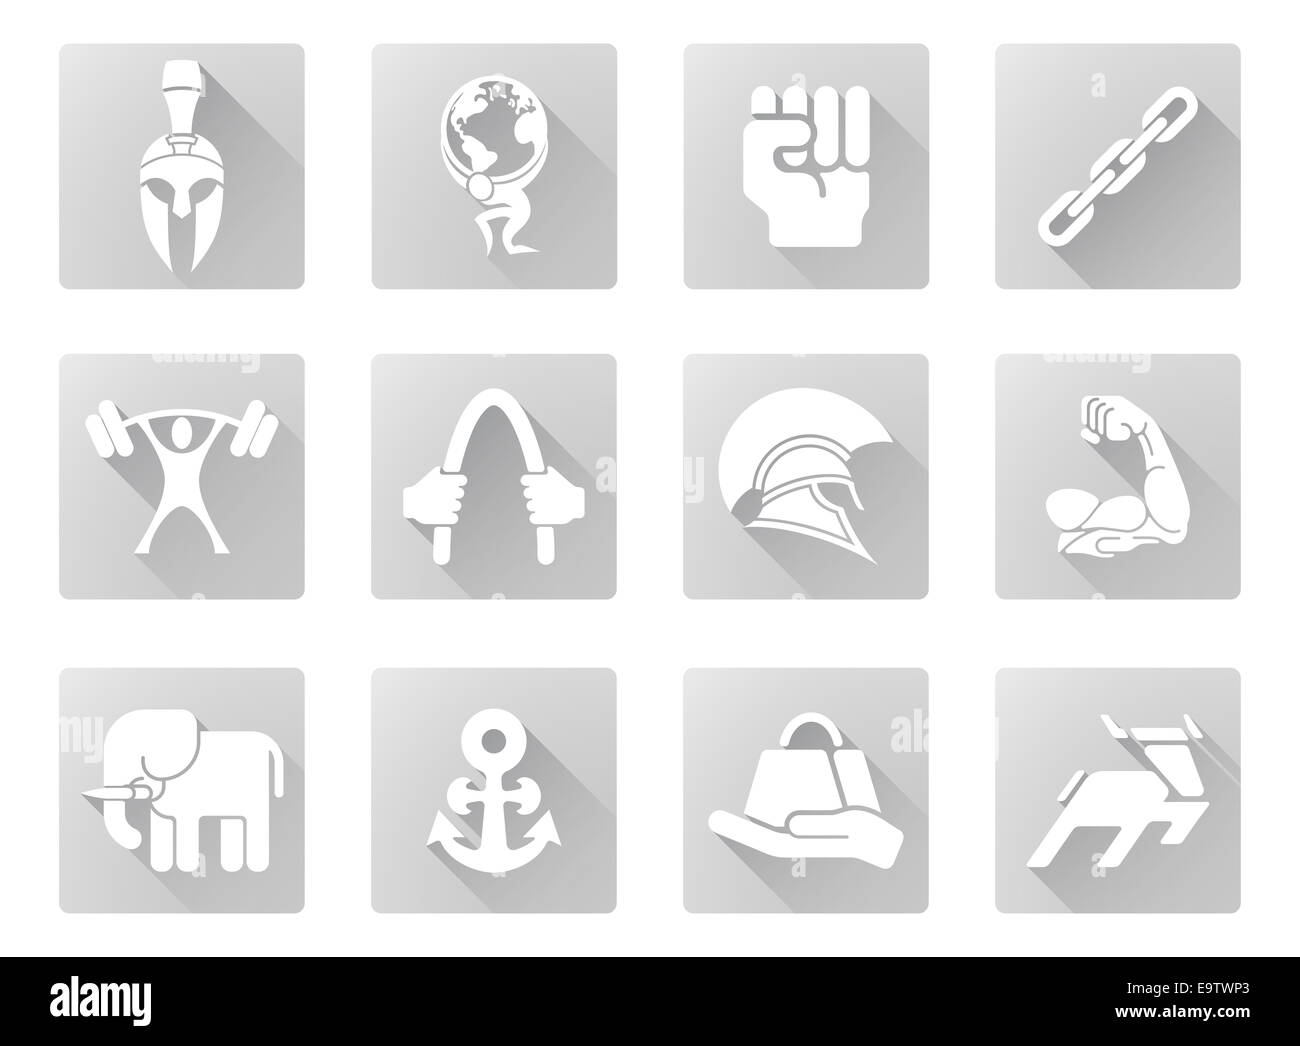 Conceptual strength icon set of icons relating to the concept of strength or being strong in a modern flat shadow style Stock Photo